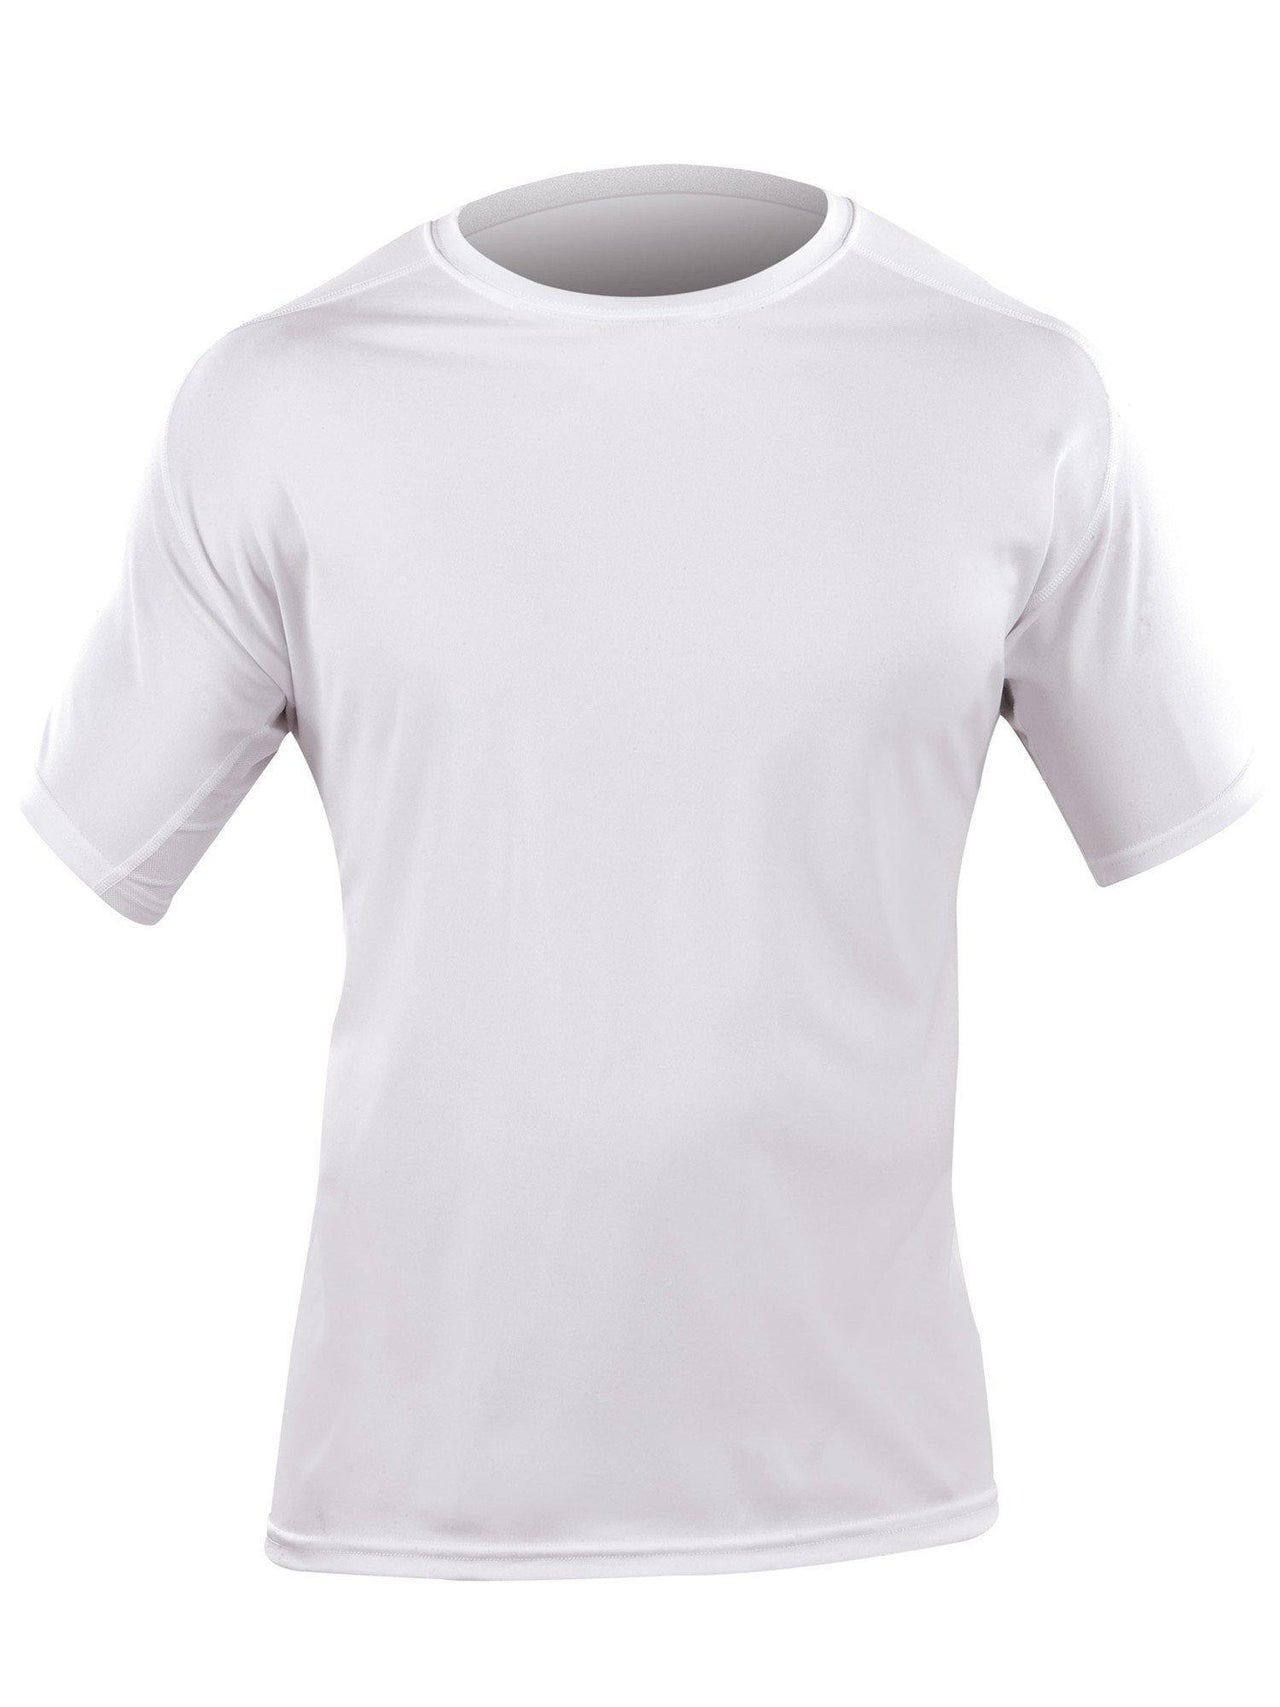 5.11 Tactical Loose Fit Crew Short Sleeve - White - TacSource